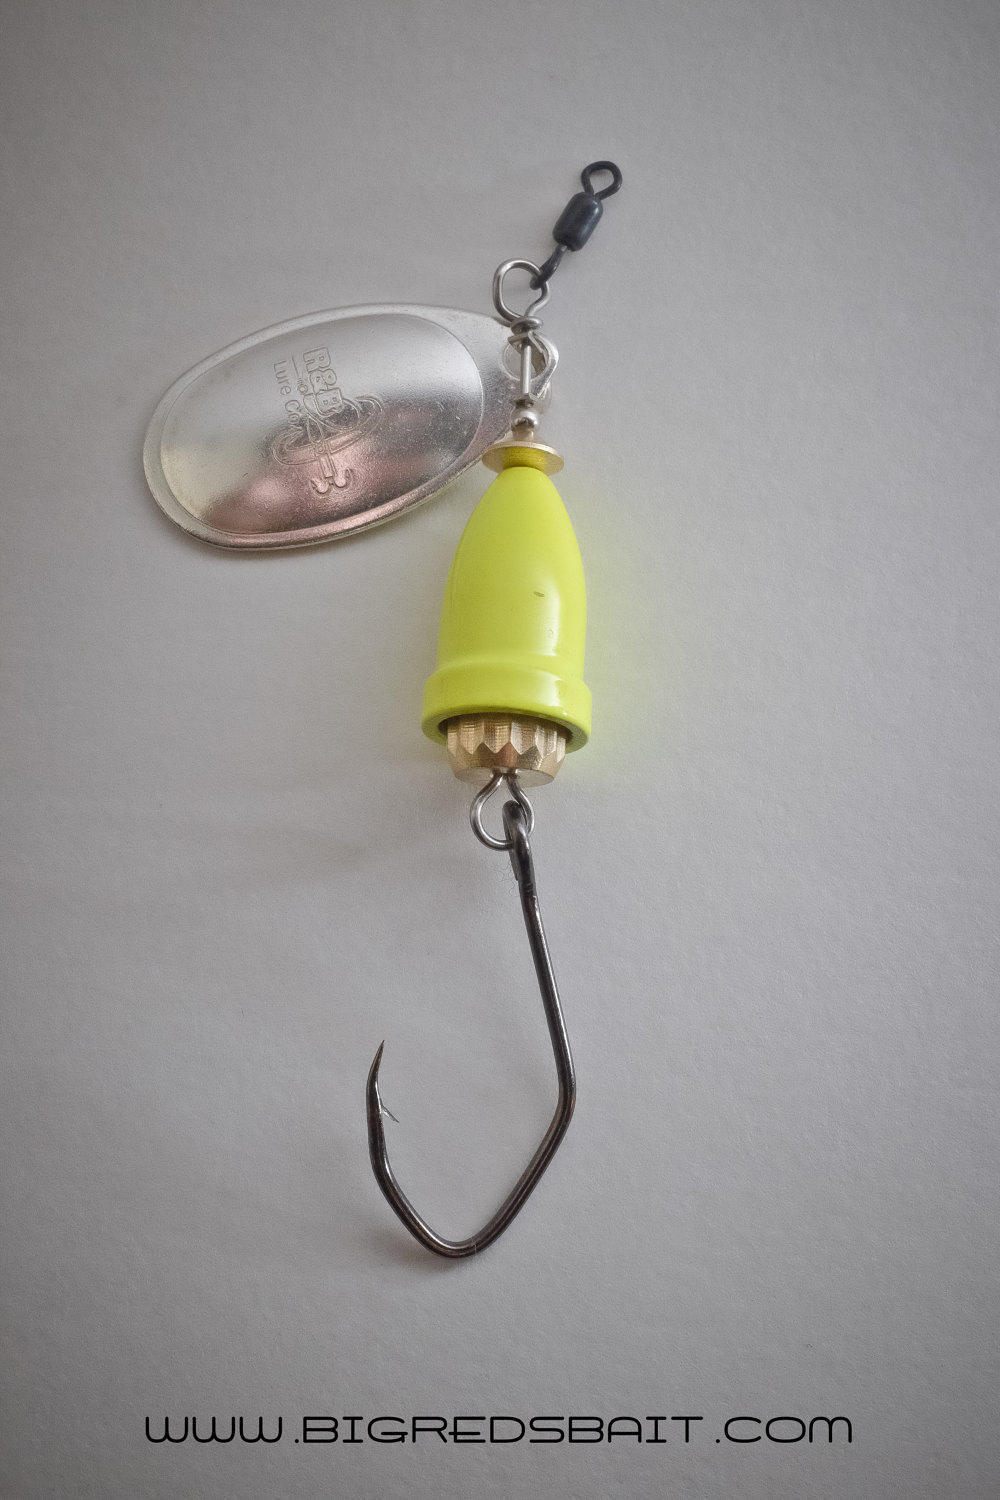 Silver, Bell body Spinner lure, Fishing Lure, Spinner Bait, Fishing Jig,  Fishing Gift, Mens Gift, Dad Gift, Fishing Accessory, Trout, Salmon